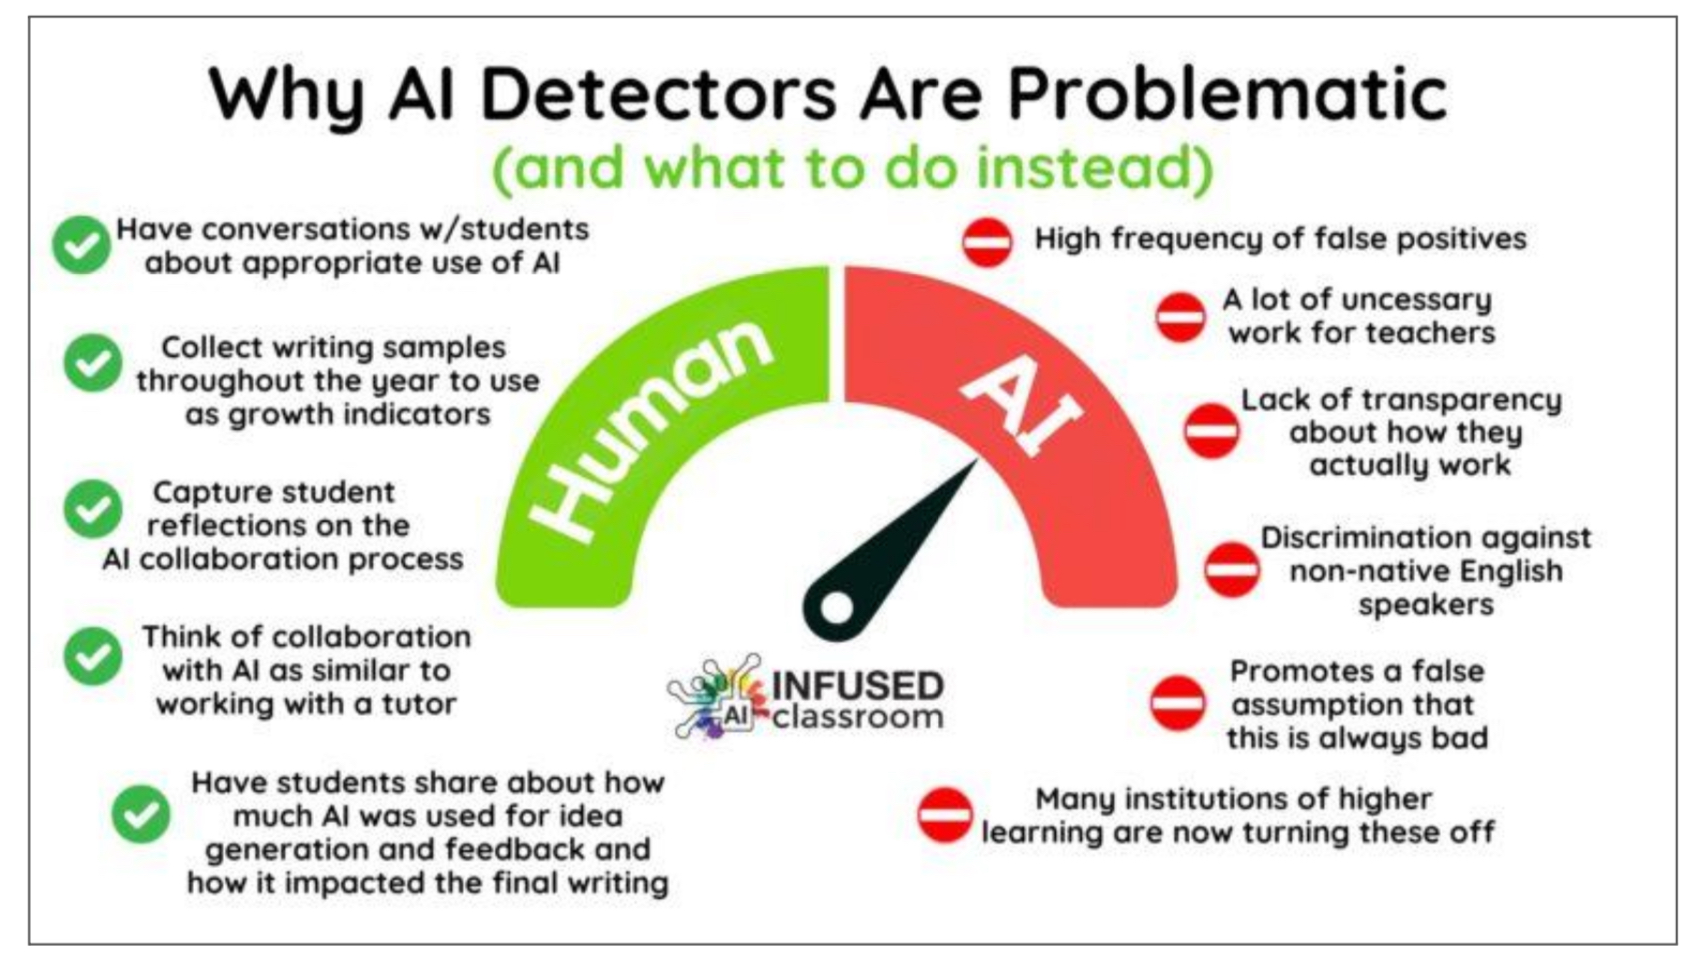 instead of using AI detectors, talk to students and scaffold assignments